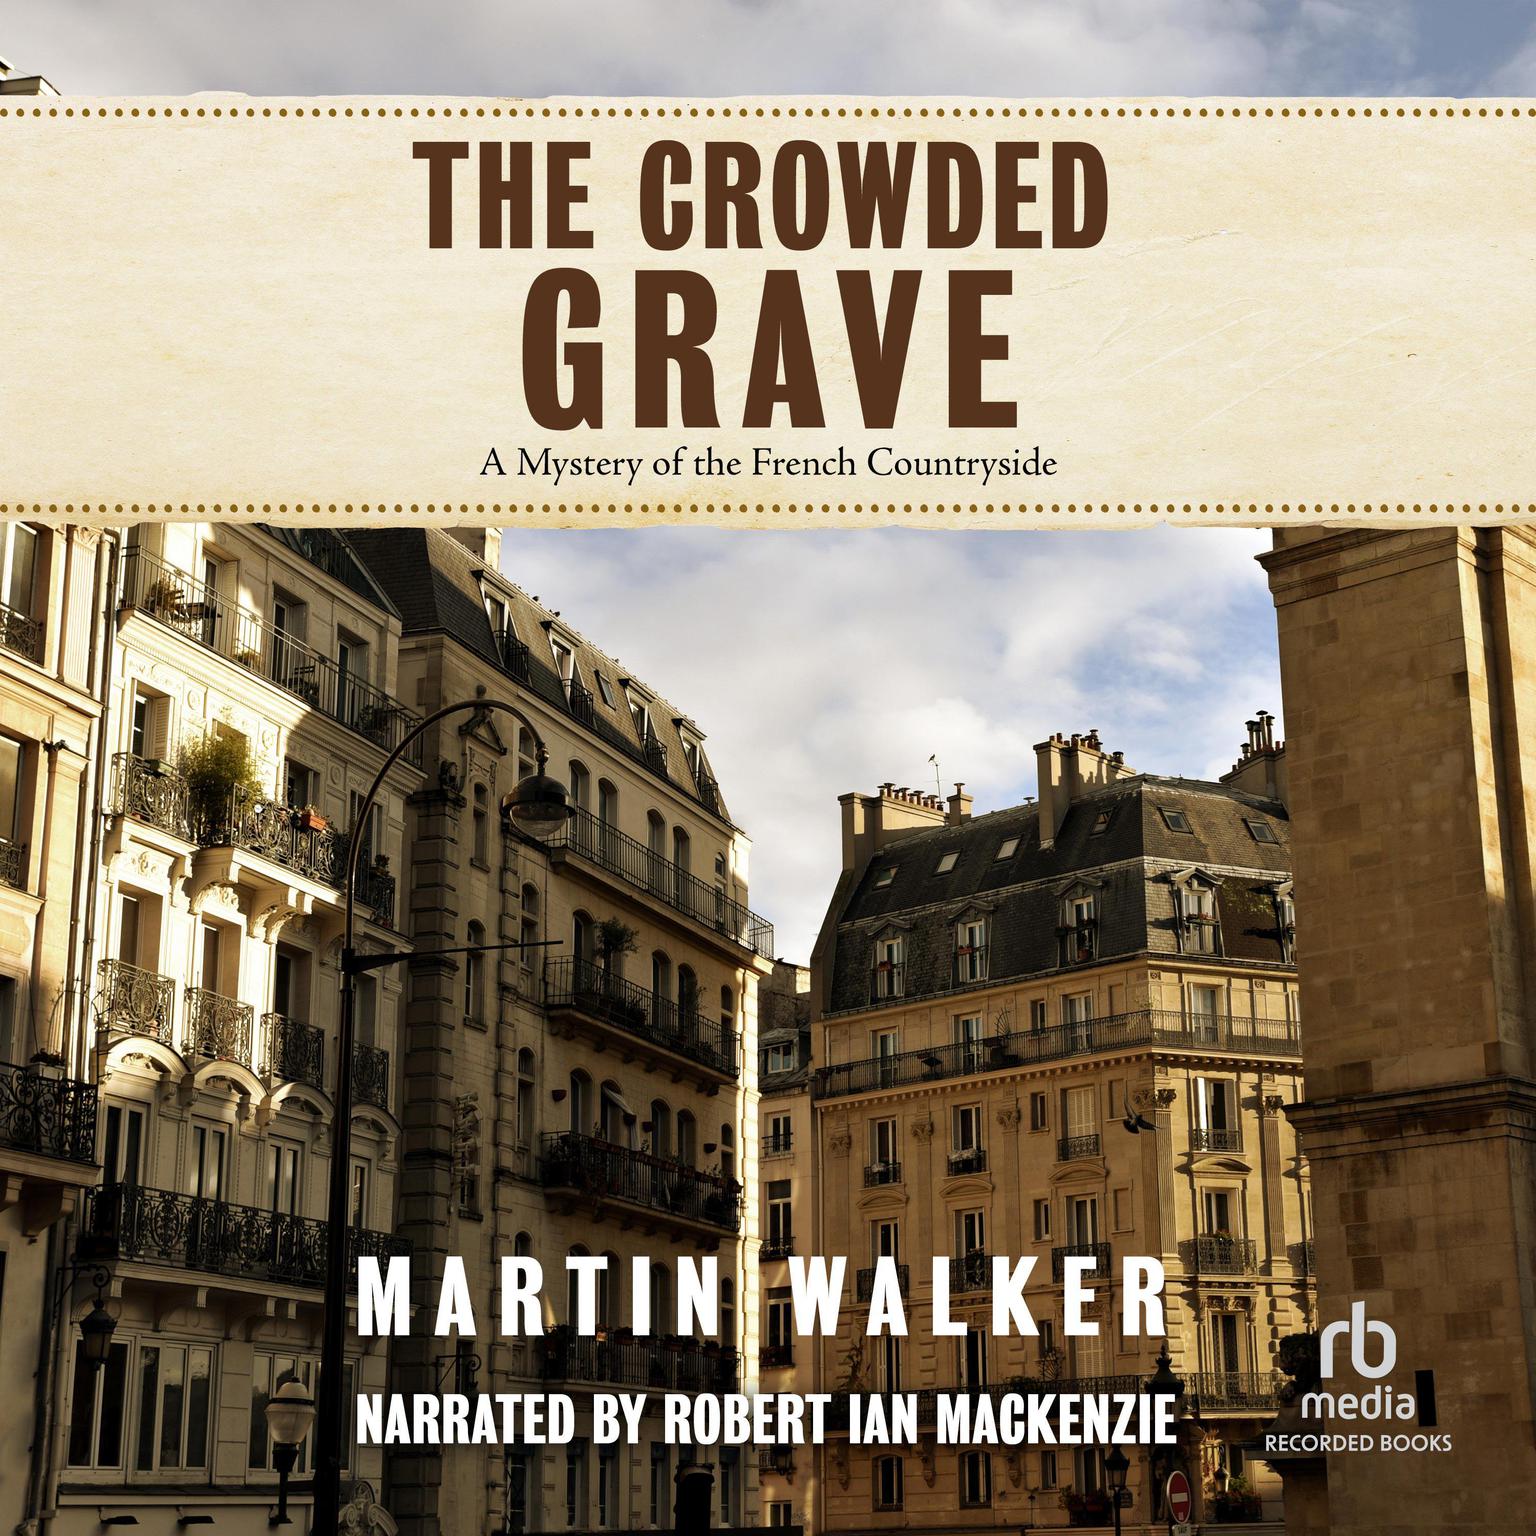 The Crowded Grave: A Mystery of the French Countryside Audiobook, by Martin Walker